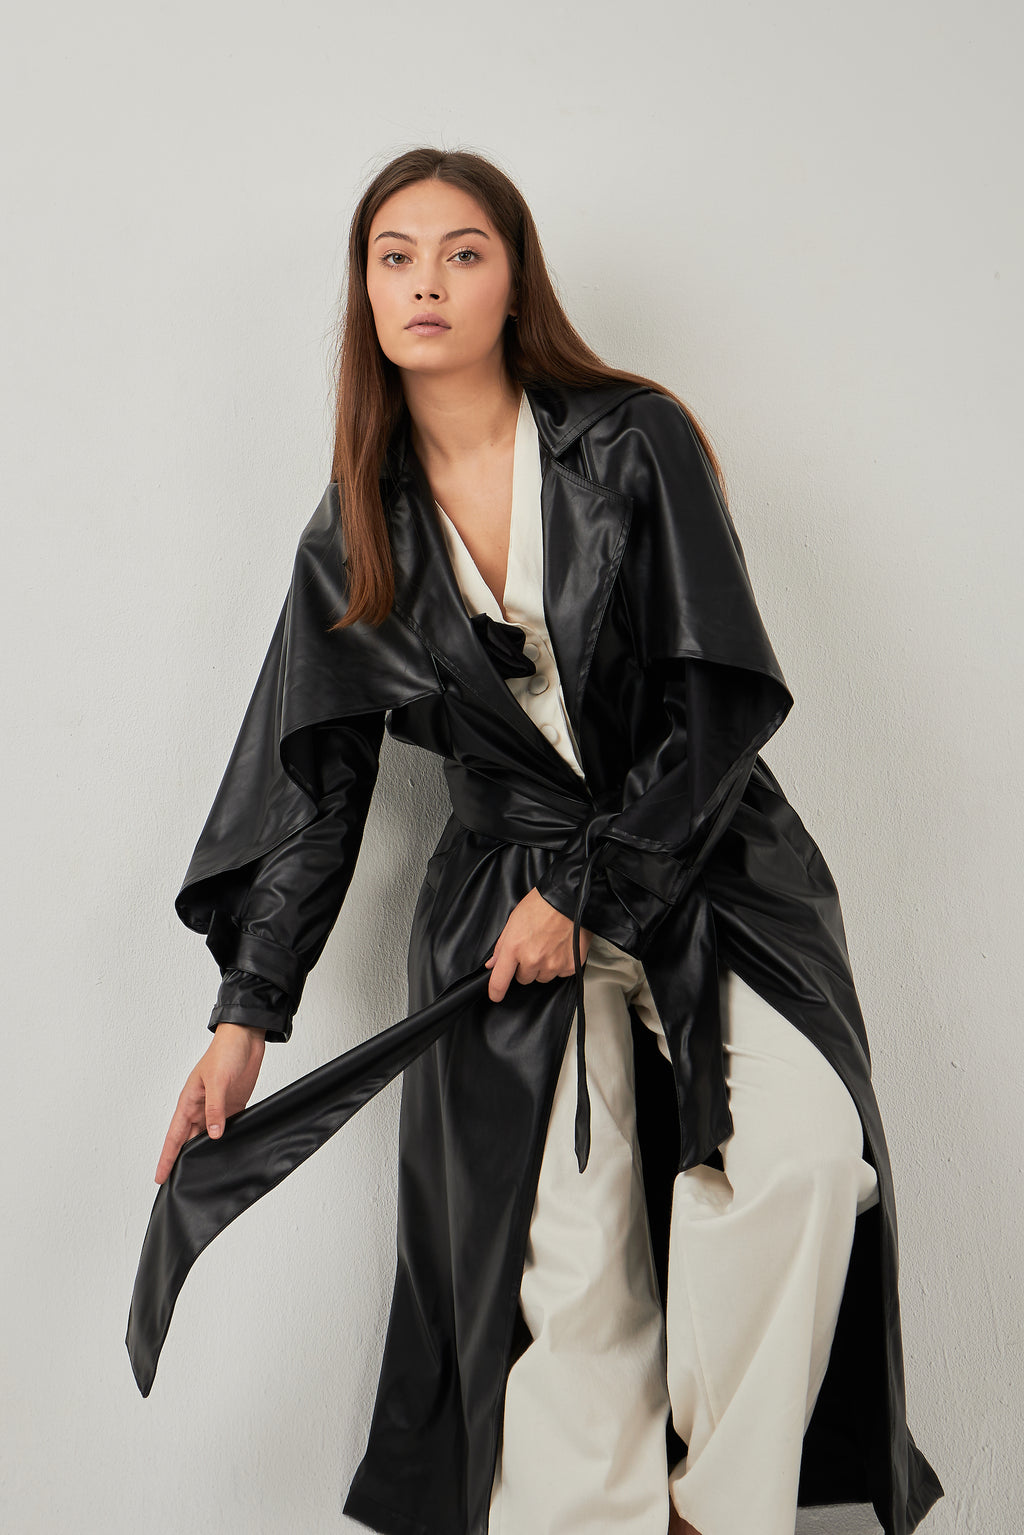 Planet coat in black leather